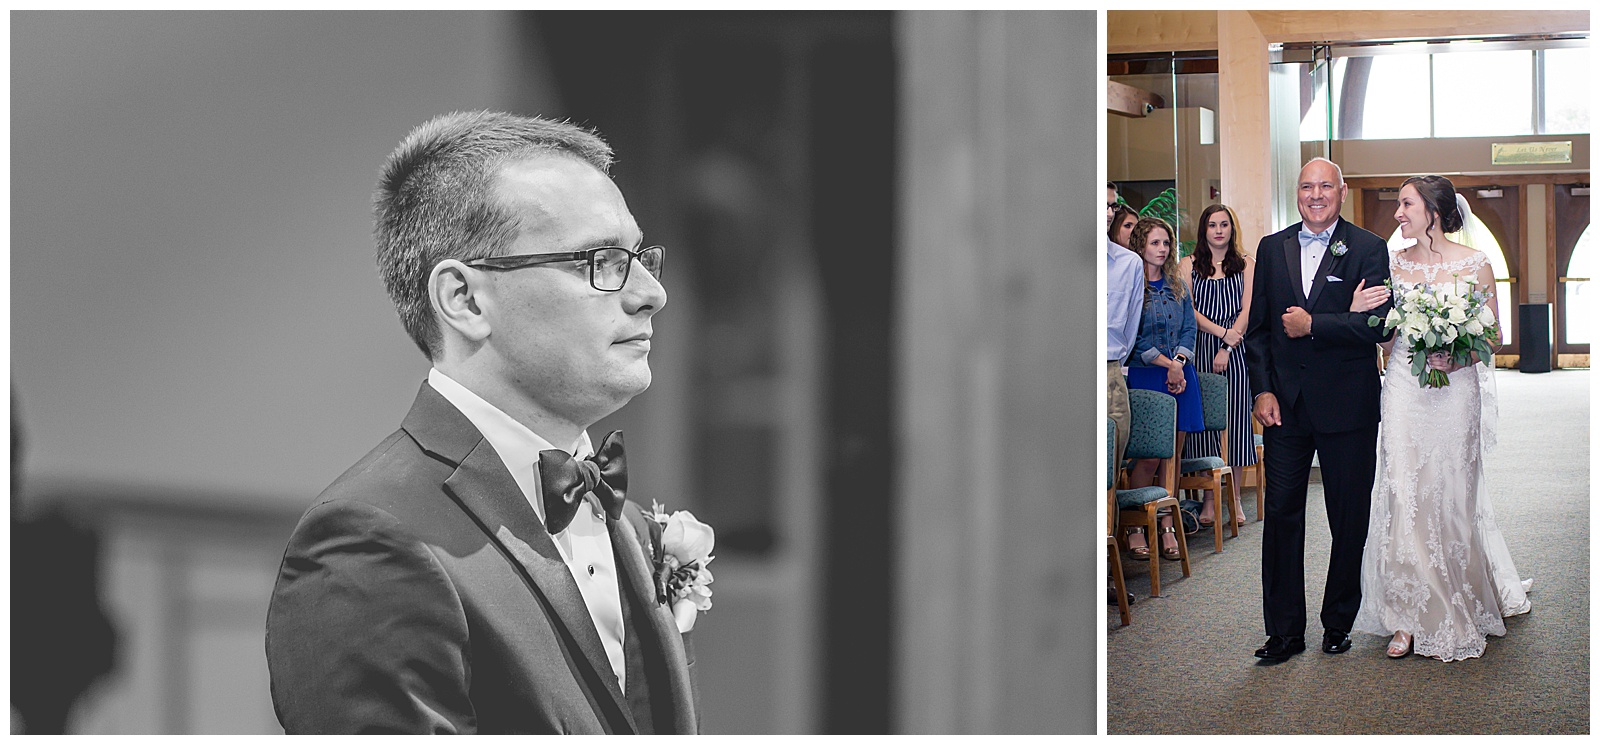 Wedding photography and videography at Church of the Resurrection in Leawood, Kansas, by Kansas City wedding photographers Wisdom-Watson Weddings.